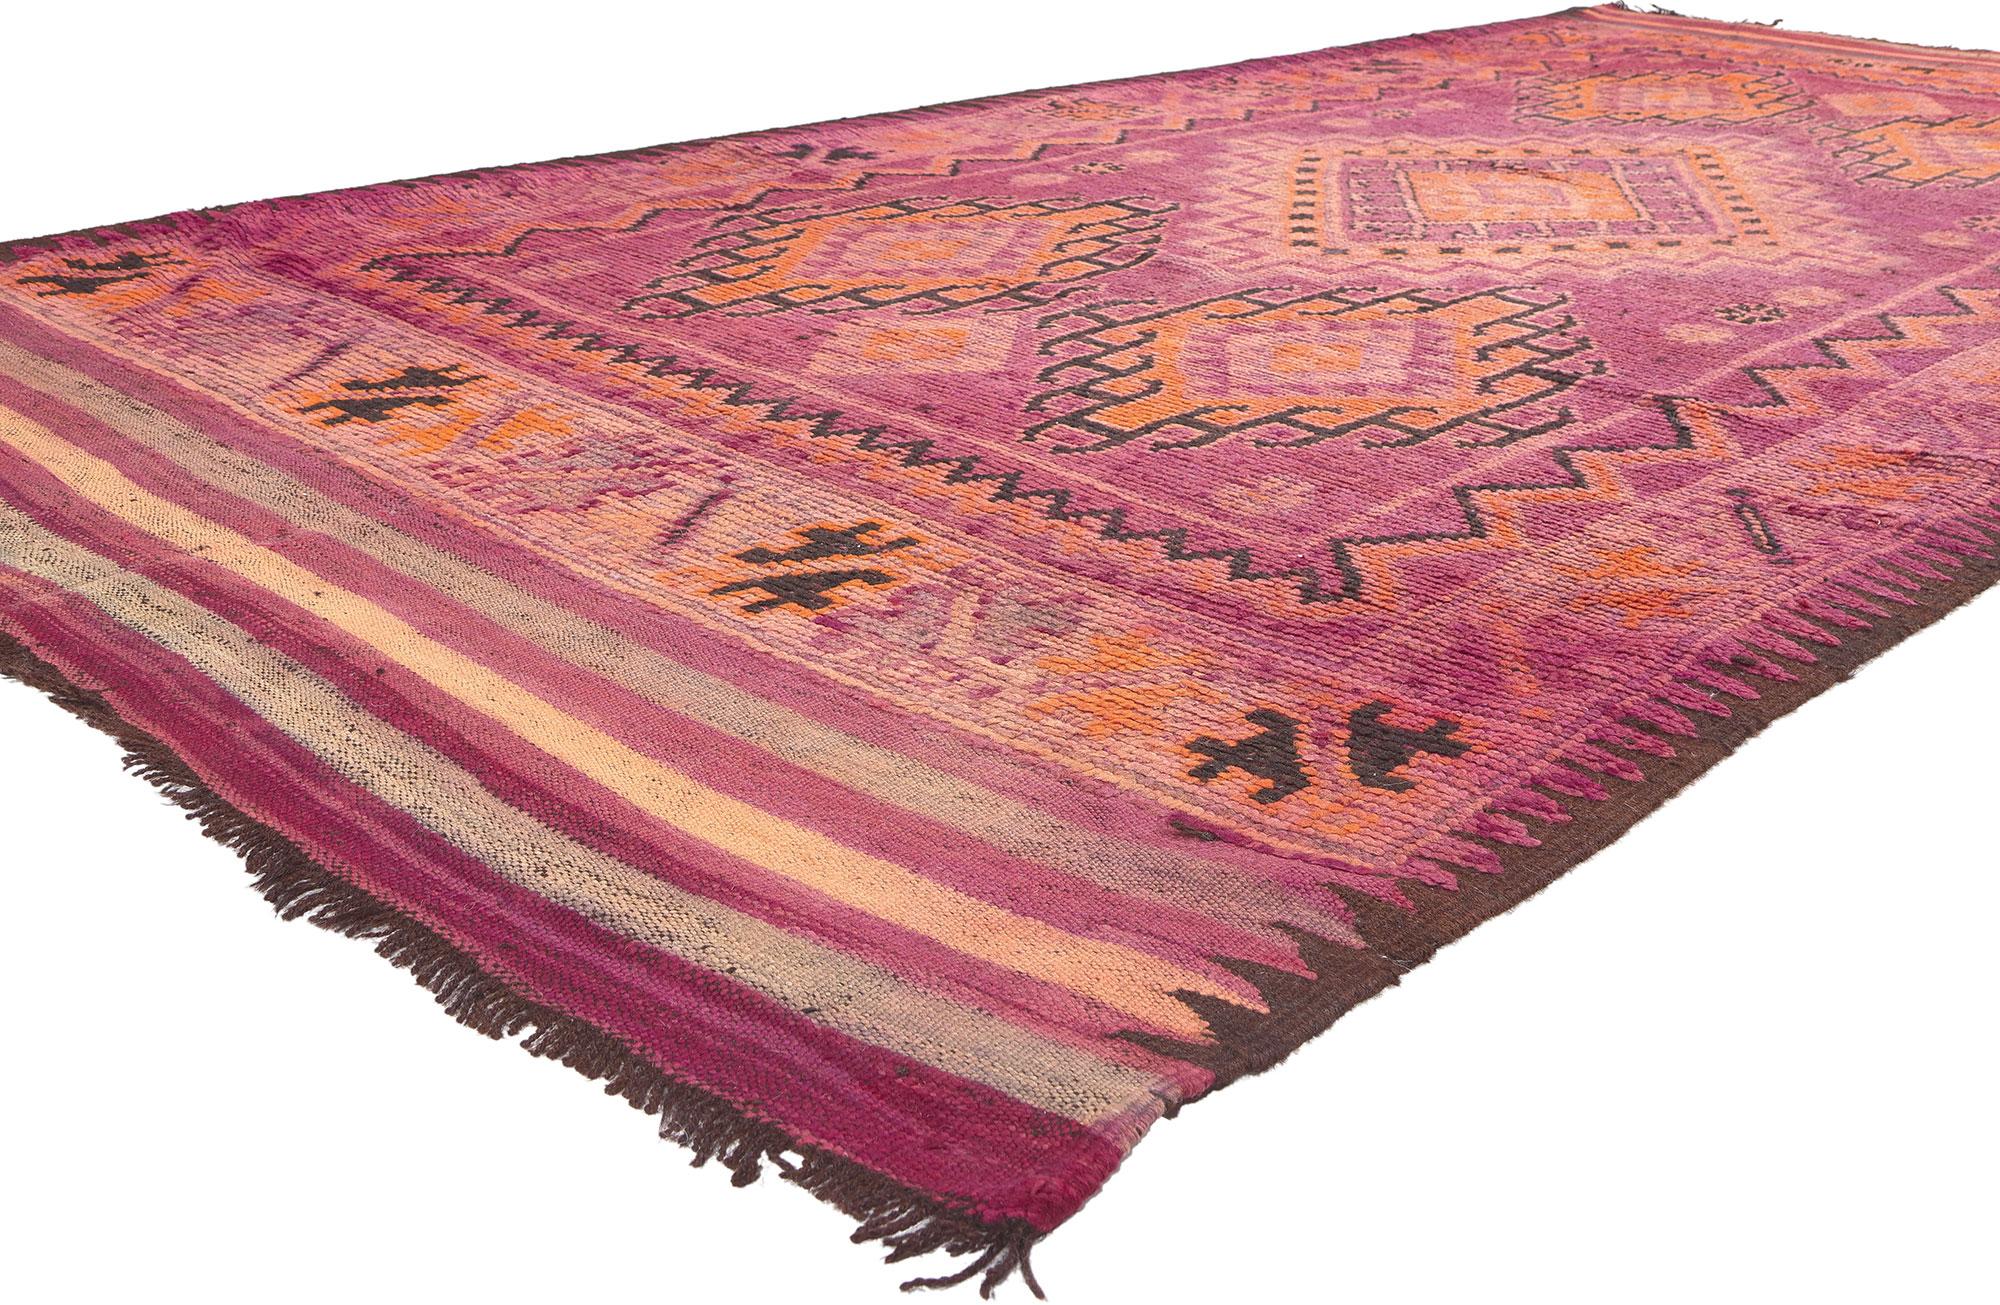 74781 Vintage Boujad Moroccan Rug, 06'00 x 13'00. 
Embark on a journey through the vibrant city of Boujad, renowned for its eccentric and artistic designs, as you step into the warmth of a cozy nomad enveloped in the delightful magenta hues of